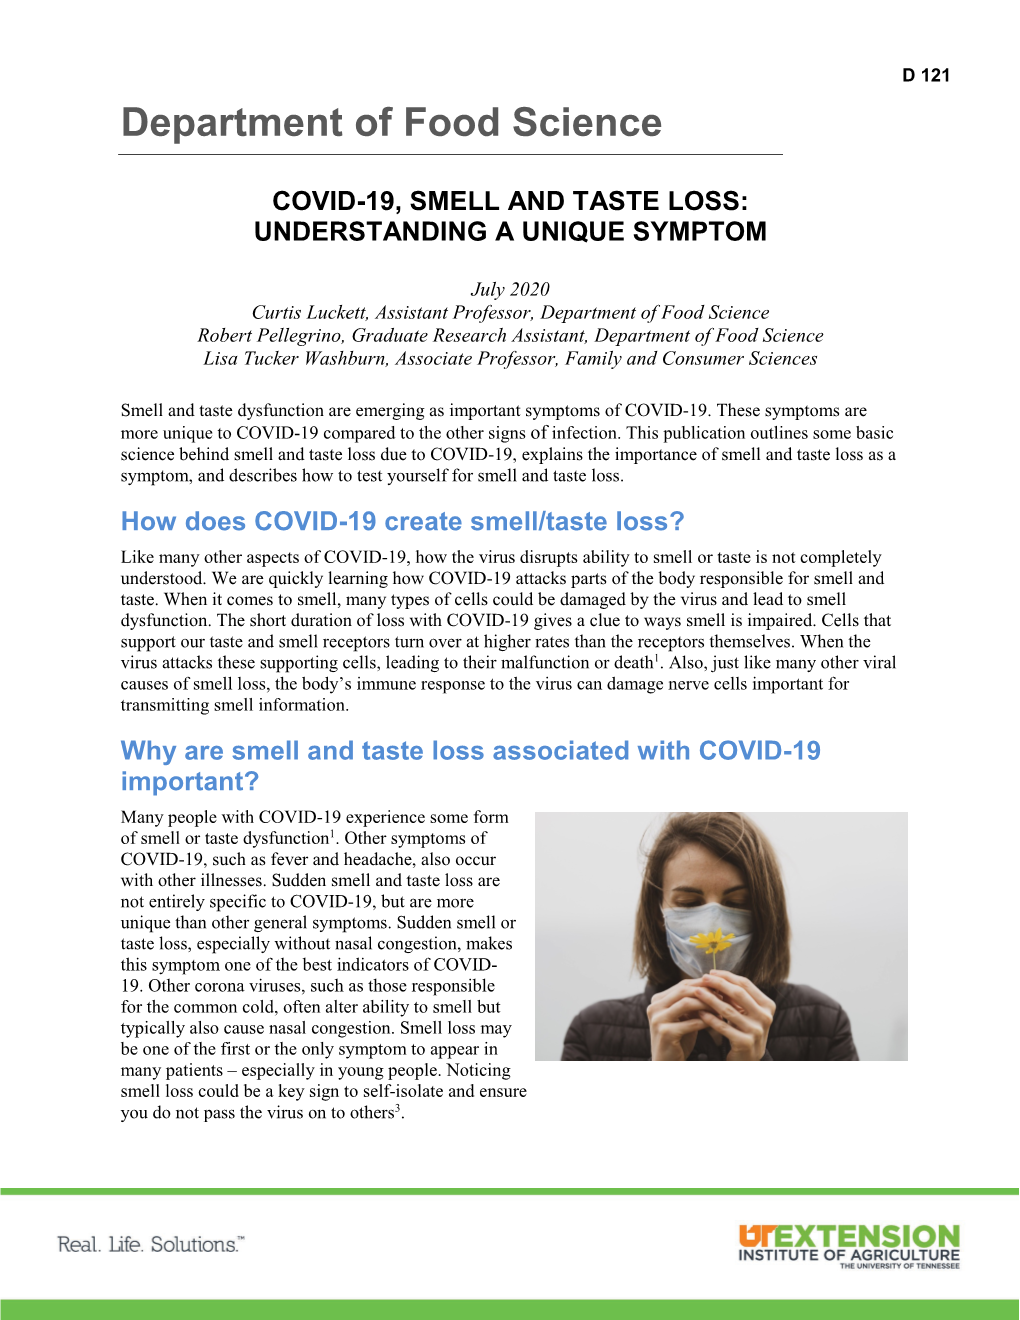 Covid-19, Smell and Taste Loss: Understanding a Unique Symptom